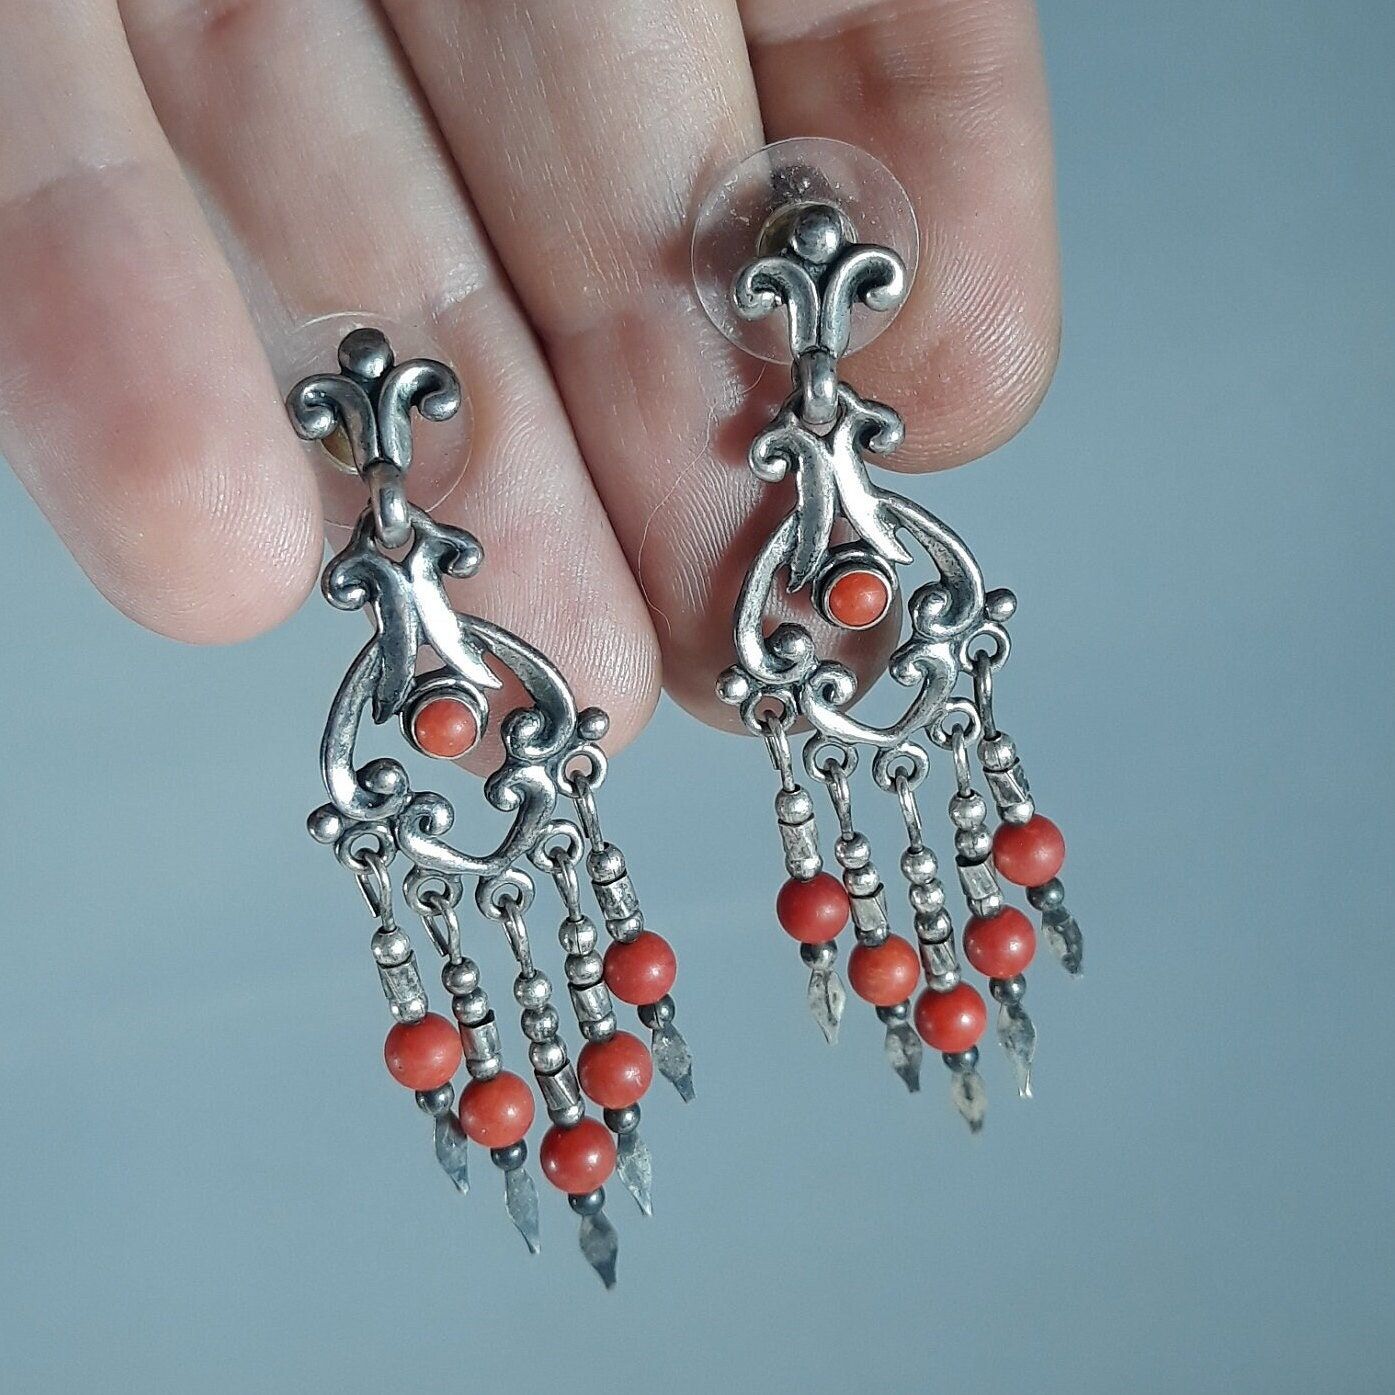 A woman holding a pair of silver earrings with orange beads